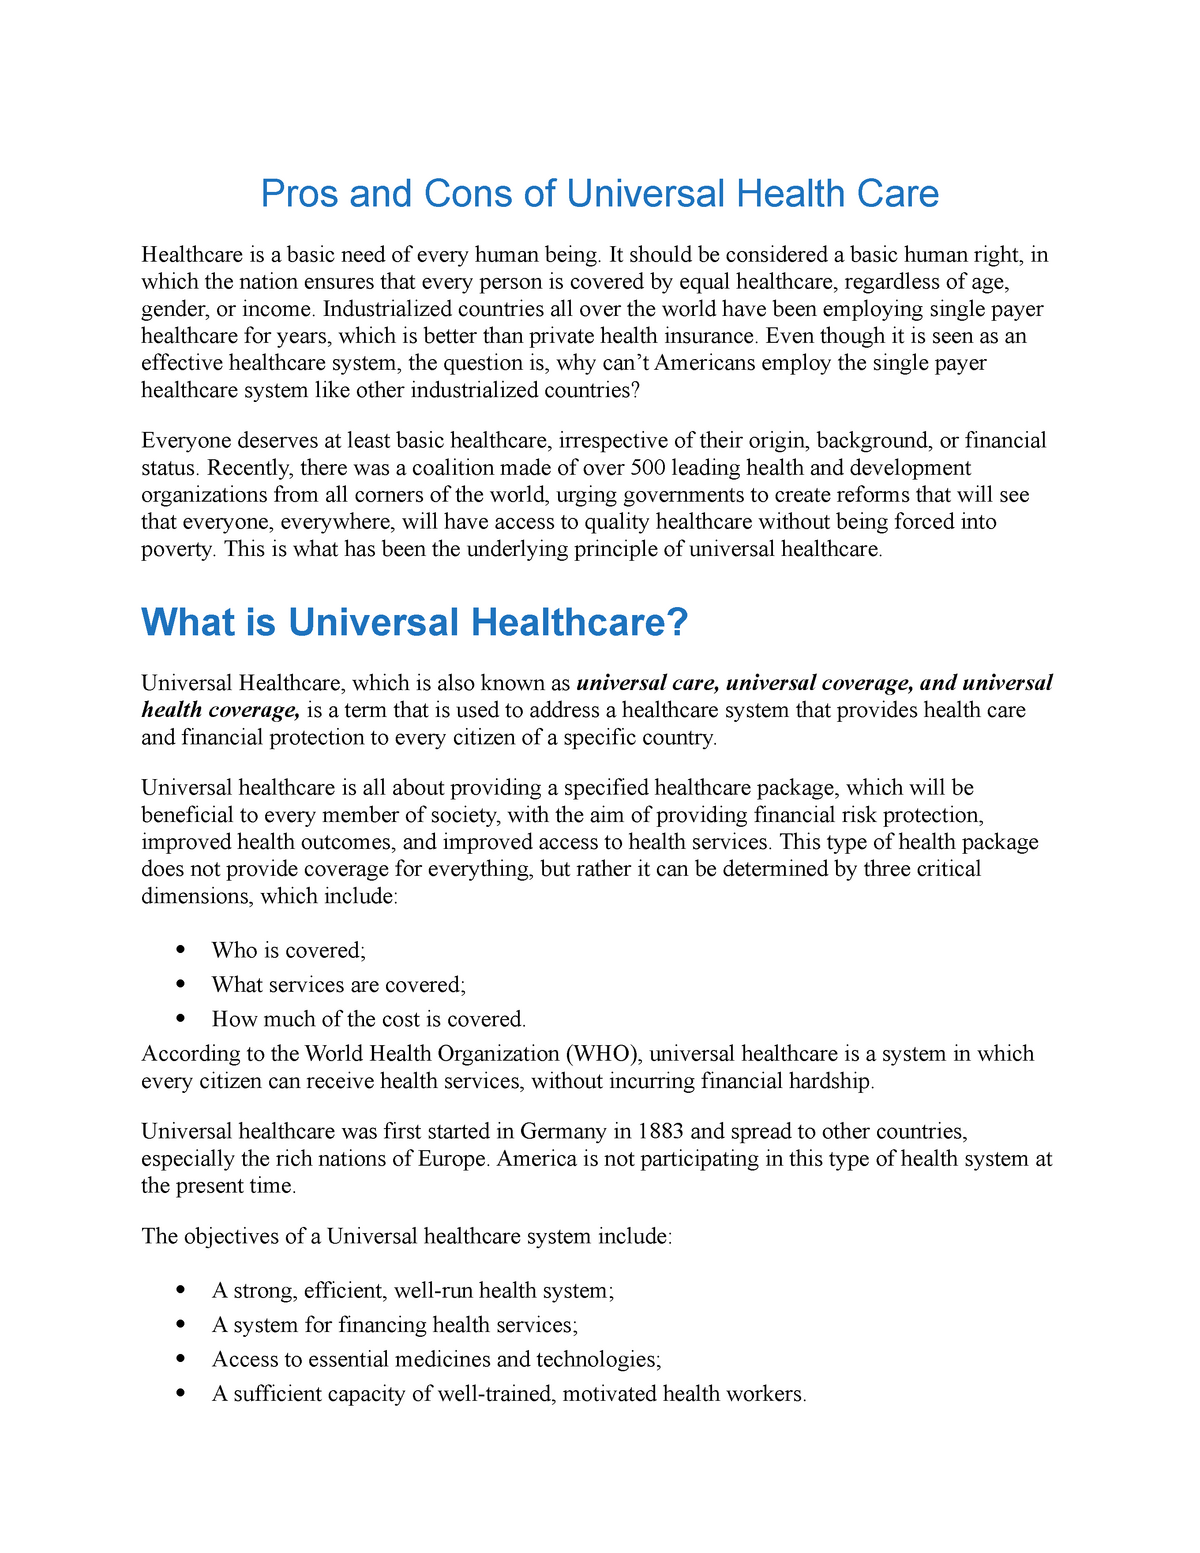 research questions about universal healthcare